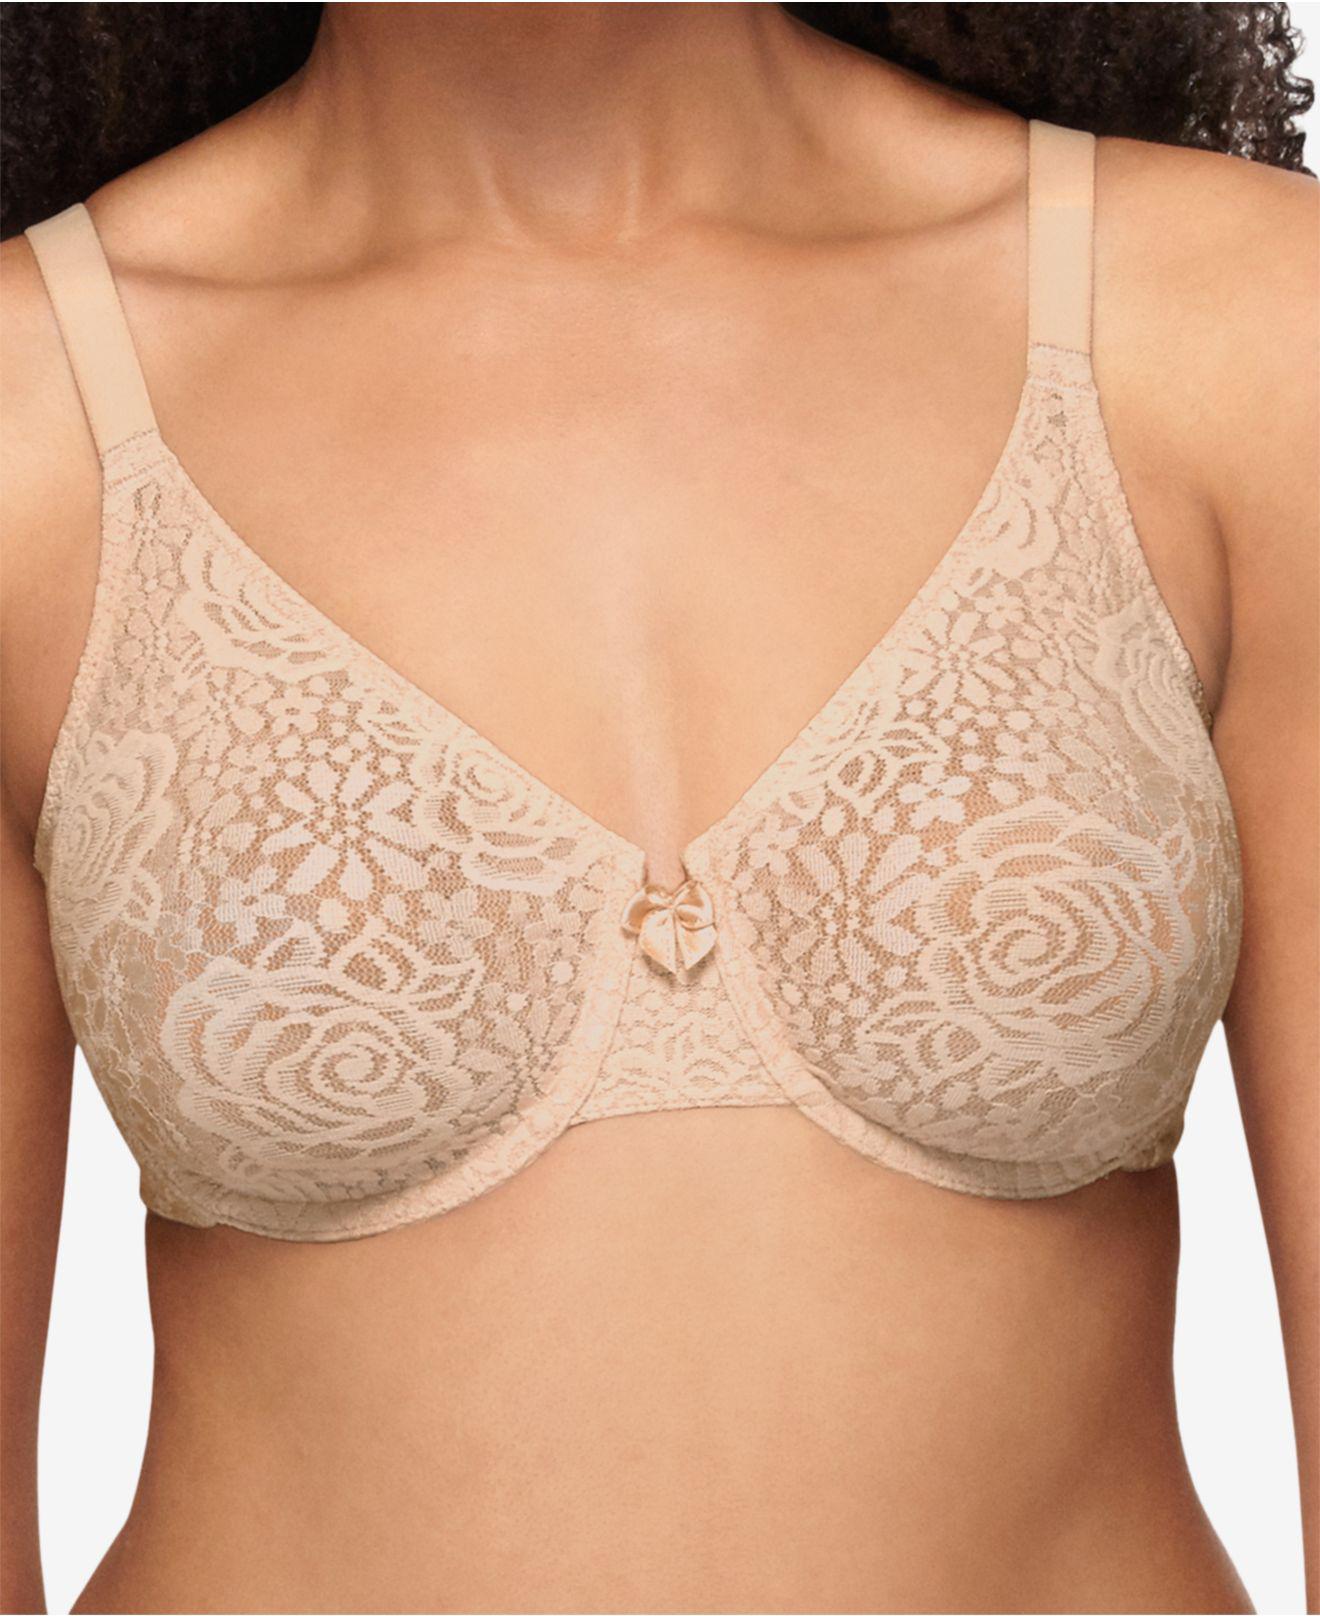 Lyst Wacoal Halo Lace Molded Underwire Bra 851205 In Natural Save 8 7595